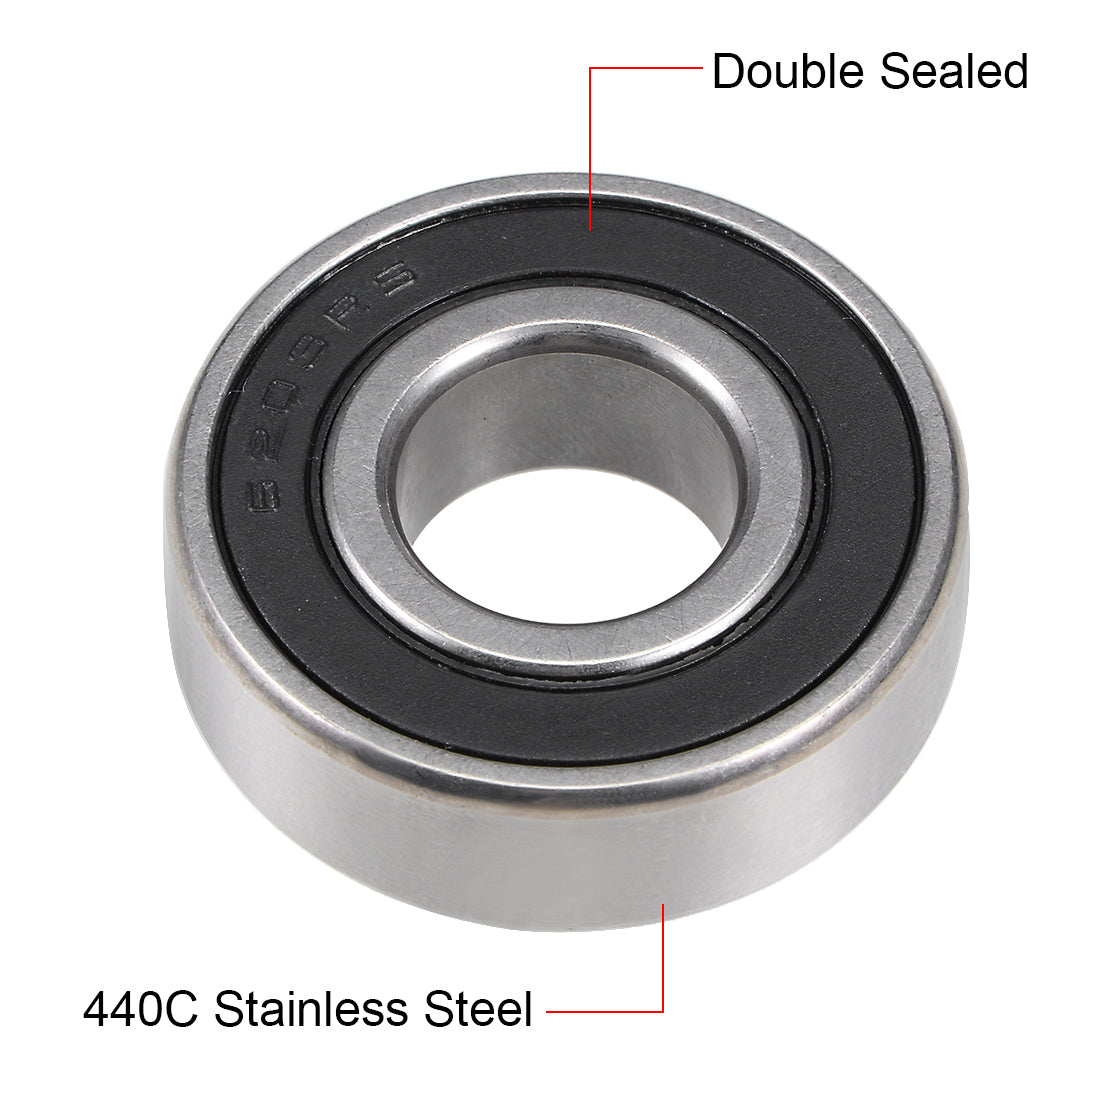 uxcell Uxcell S6203-2RS Stainless Steel Ball Bearing 17x40x12mm Double Sealed 6203RS Bearings